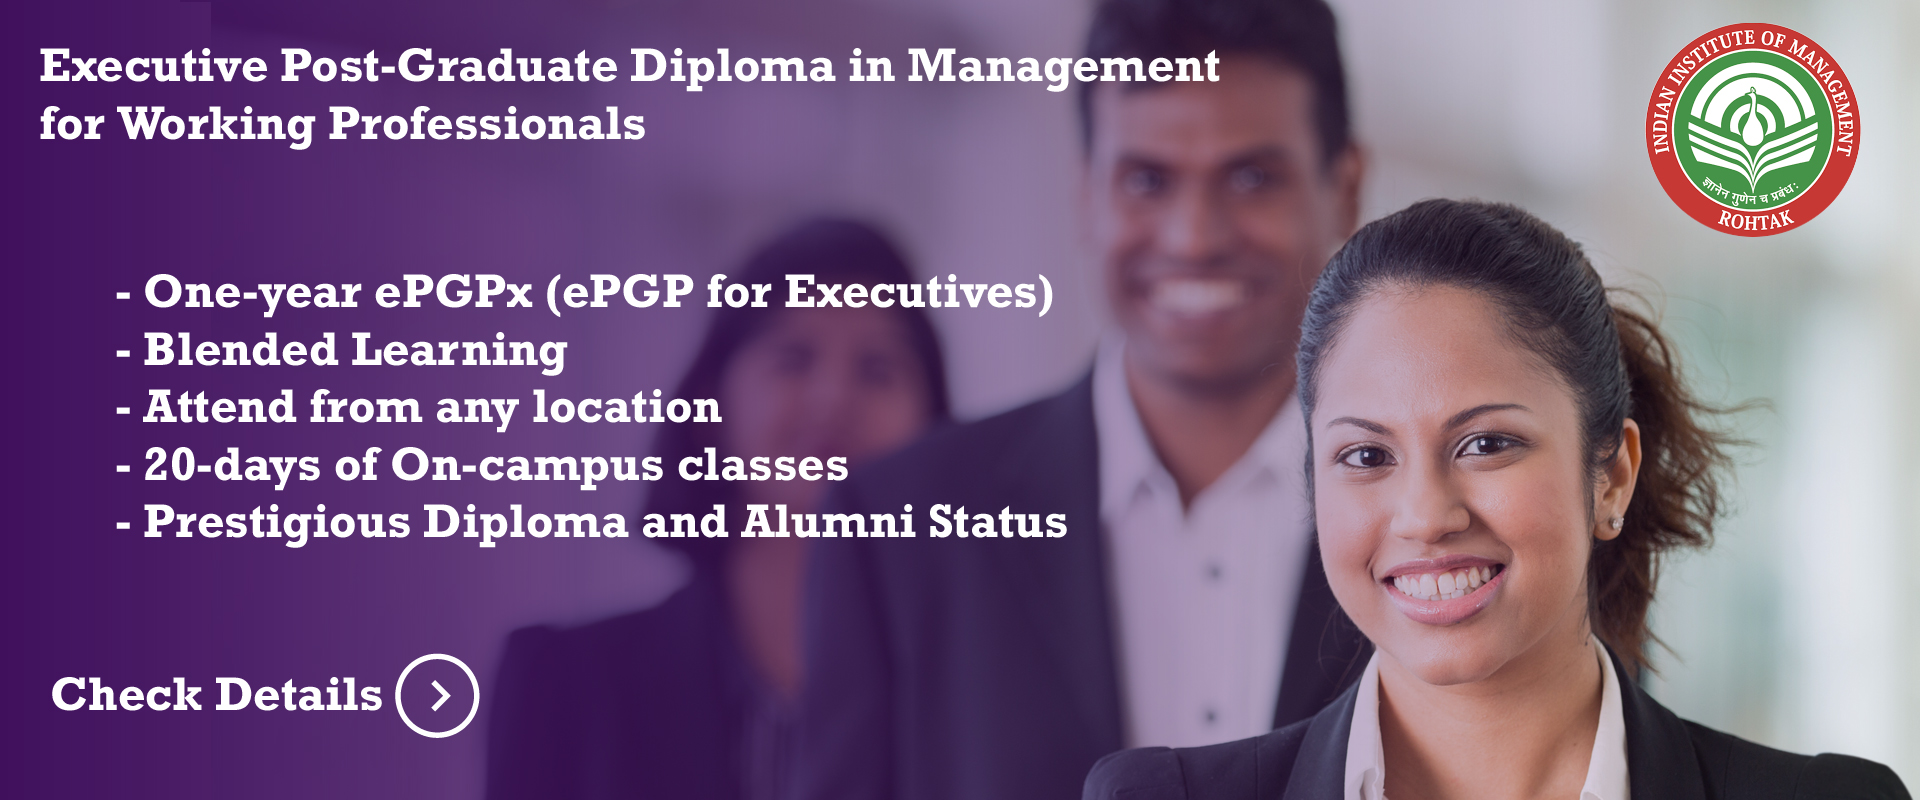 Indian Institute of Management (IIM), Rohtak Executive PG Diploma Programme in Management (ePGPx) Admission 2021-22